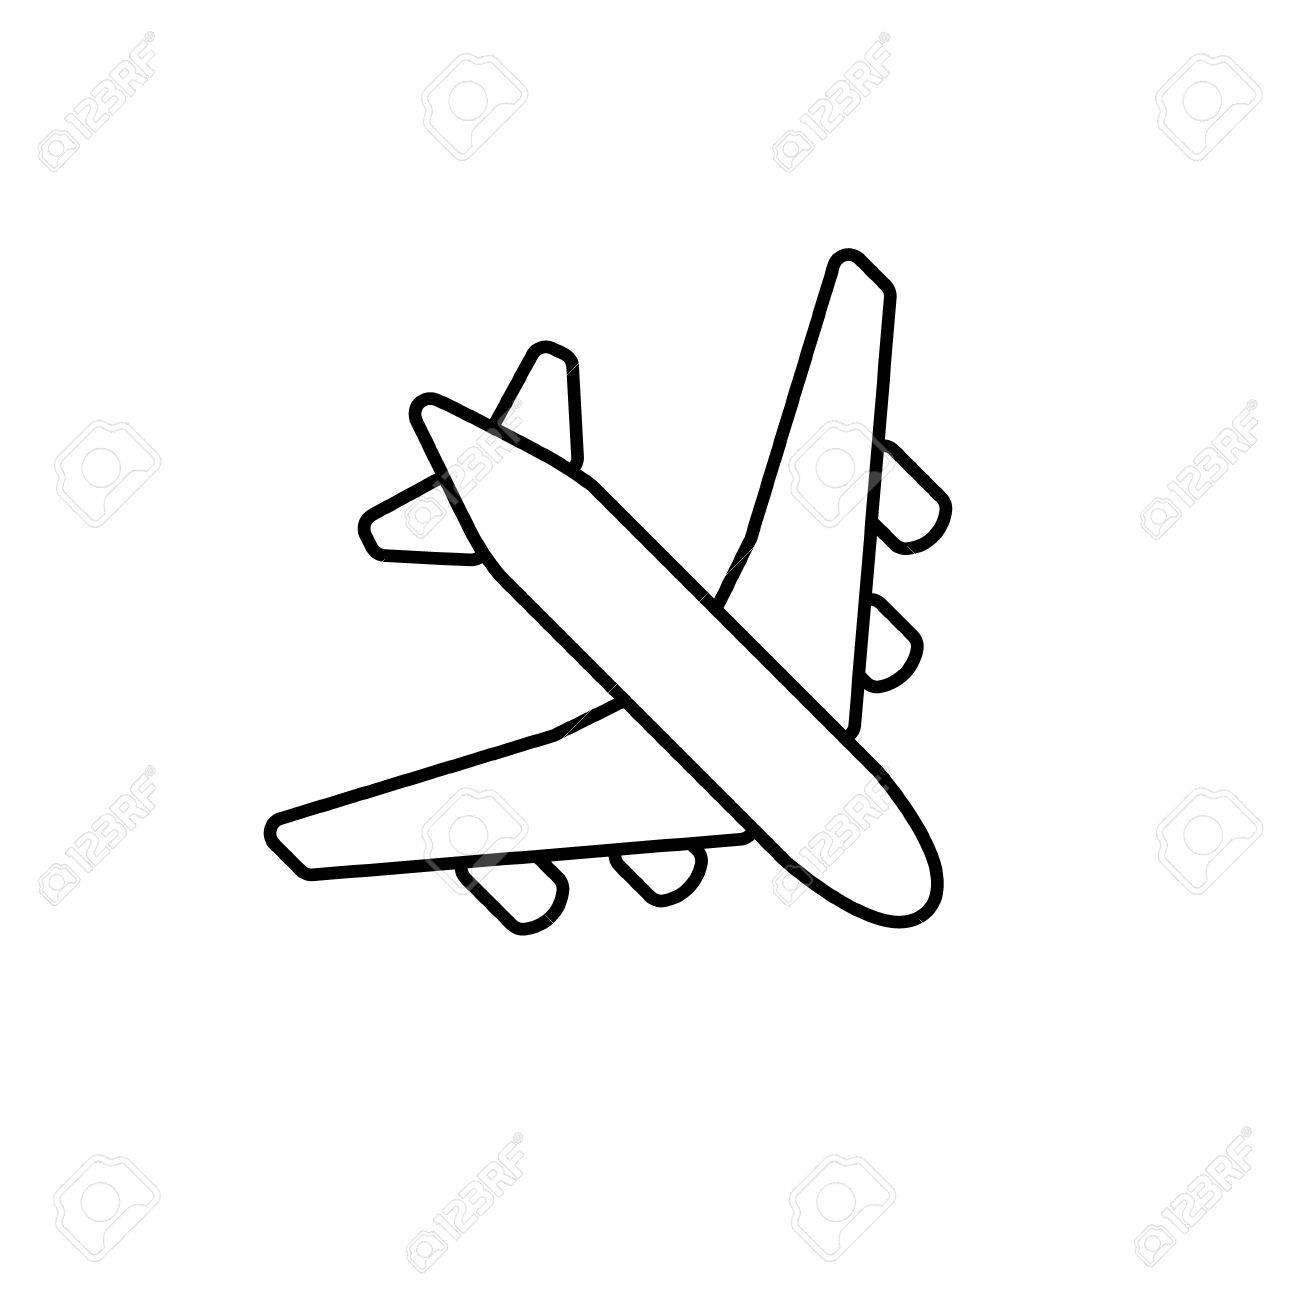 Airplane clipart easy.